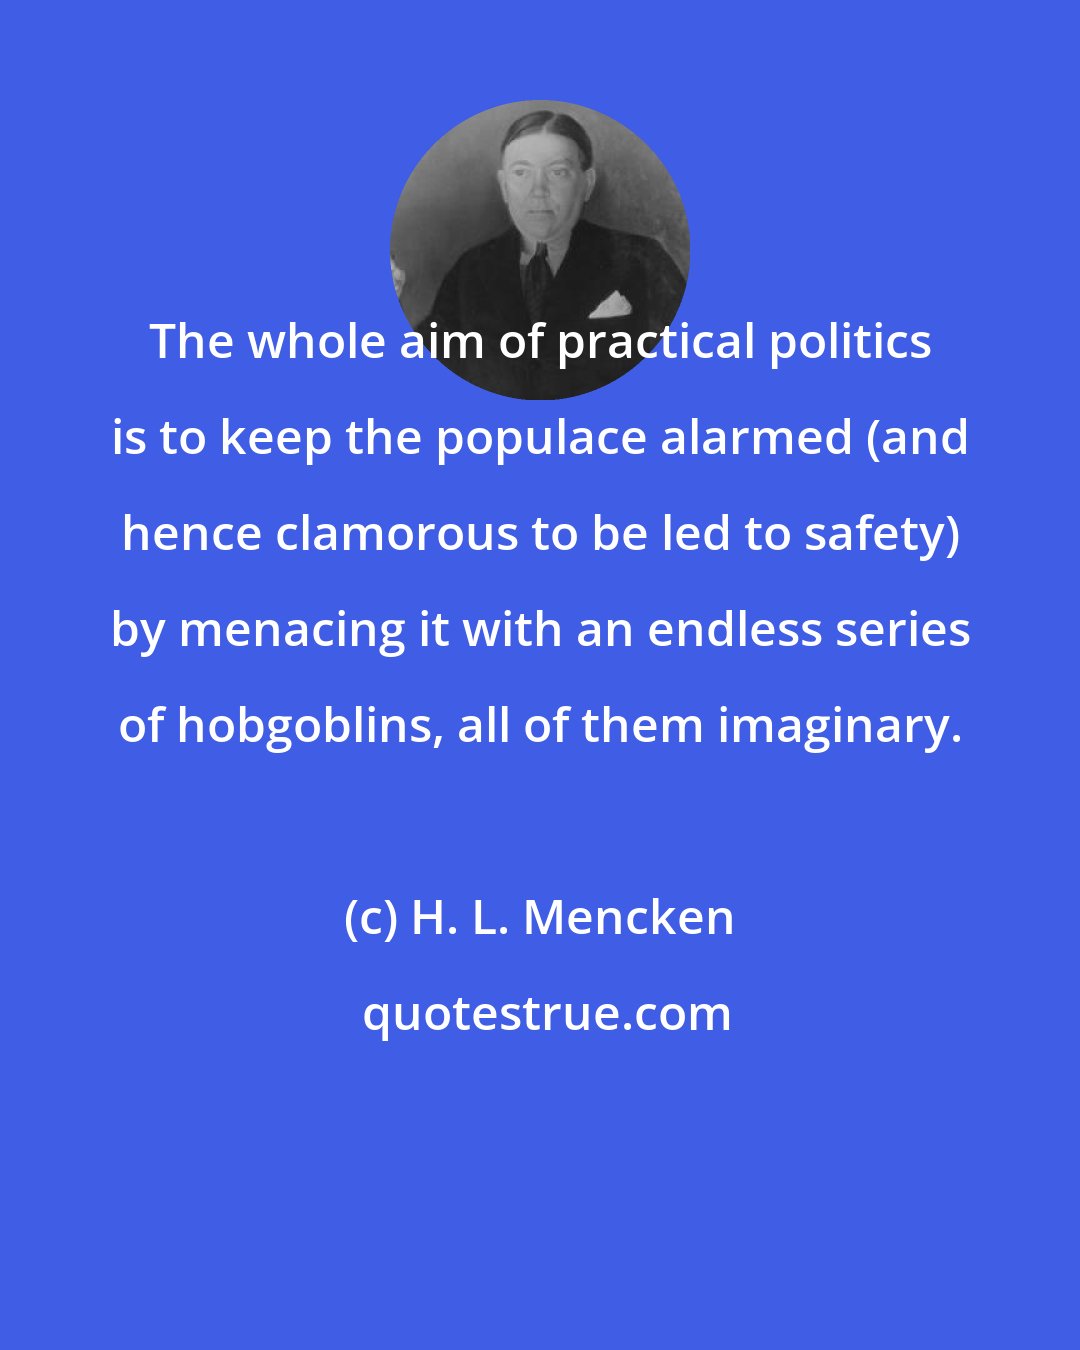 H. L. Mencken: The whole aim of practical politics is to keep the populace alarmed (and hence clamorous to be led to safety) by menacing it with an endless series of hobgoblins, all of them imaginary.